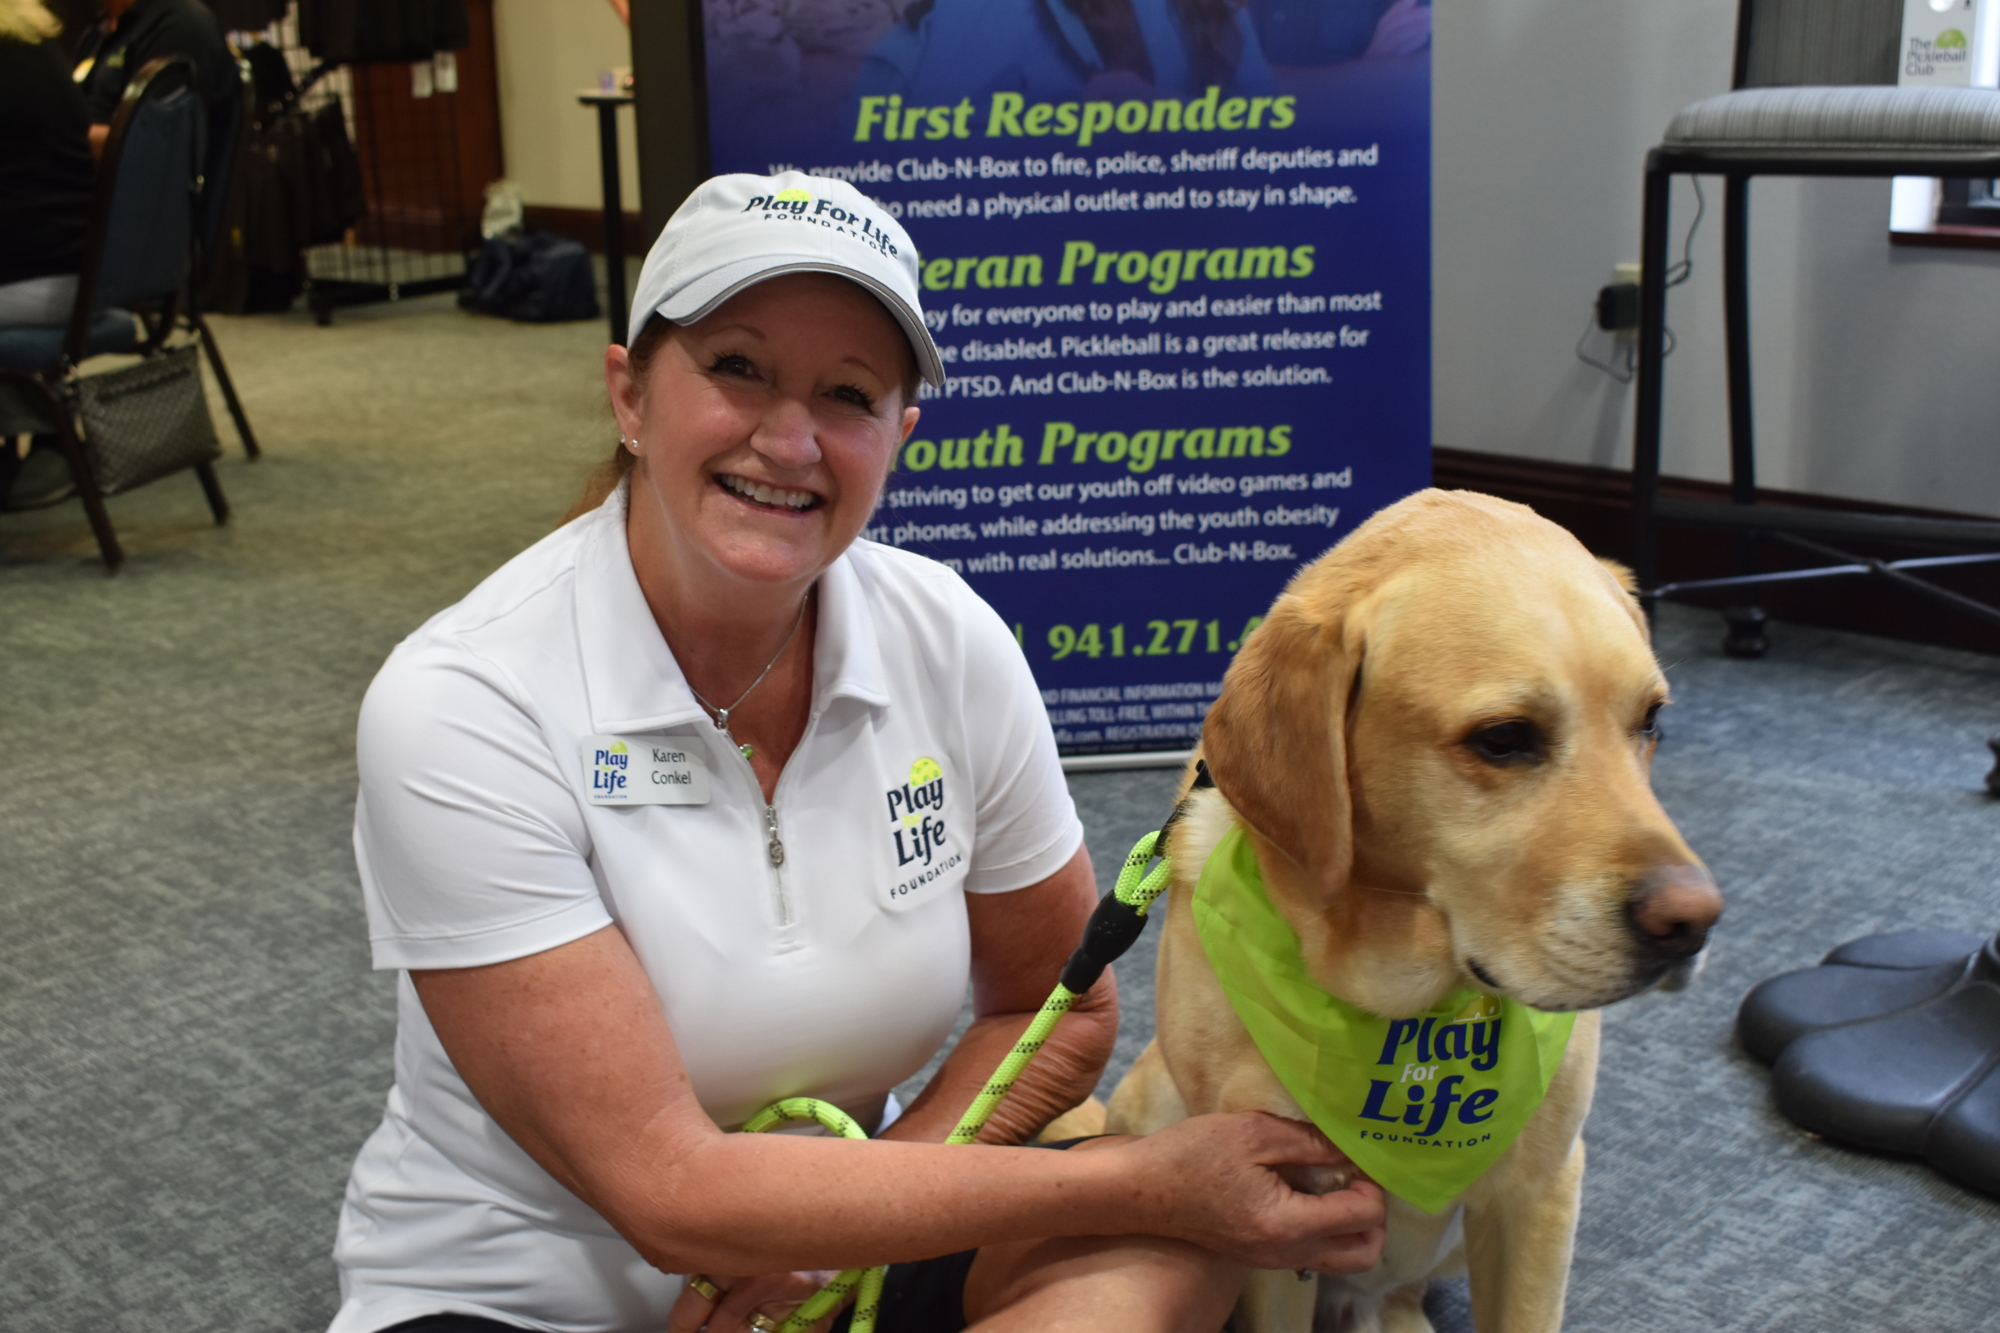 Karen Conkel of Inlets, a board member of the Play for Life foundation, greets visitors alongside the organization's mascot, Levi.